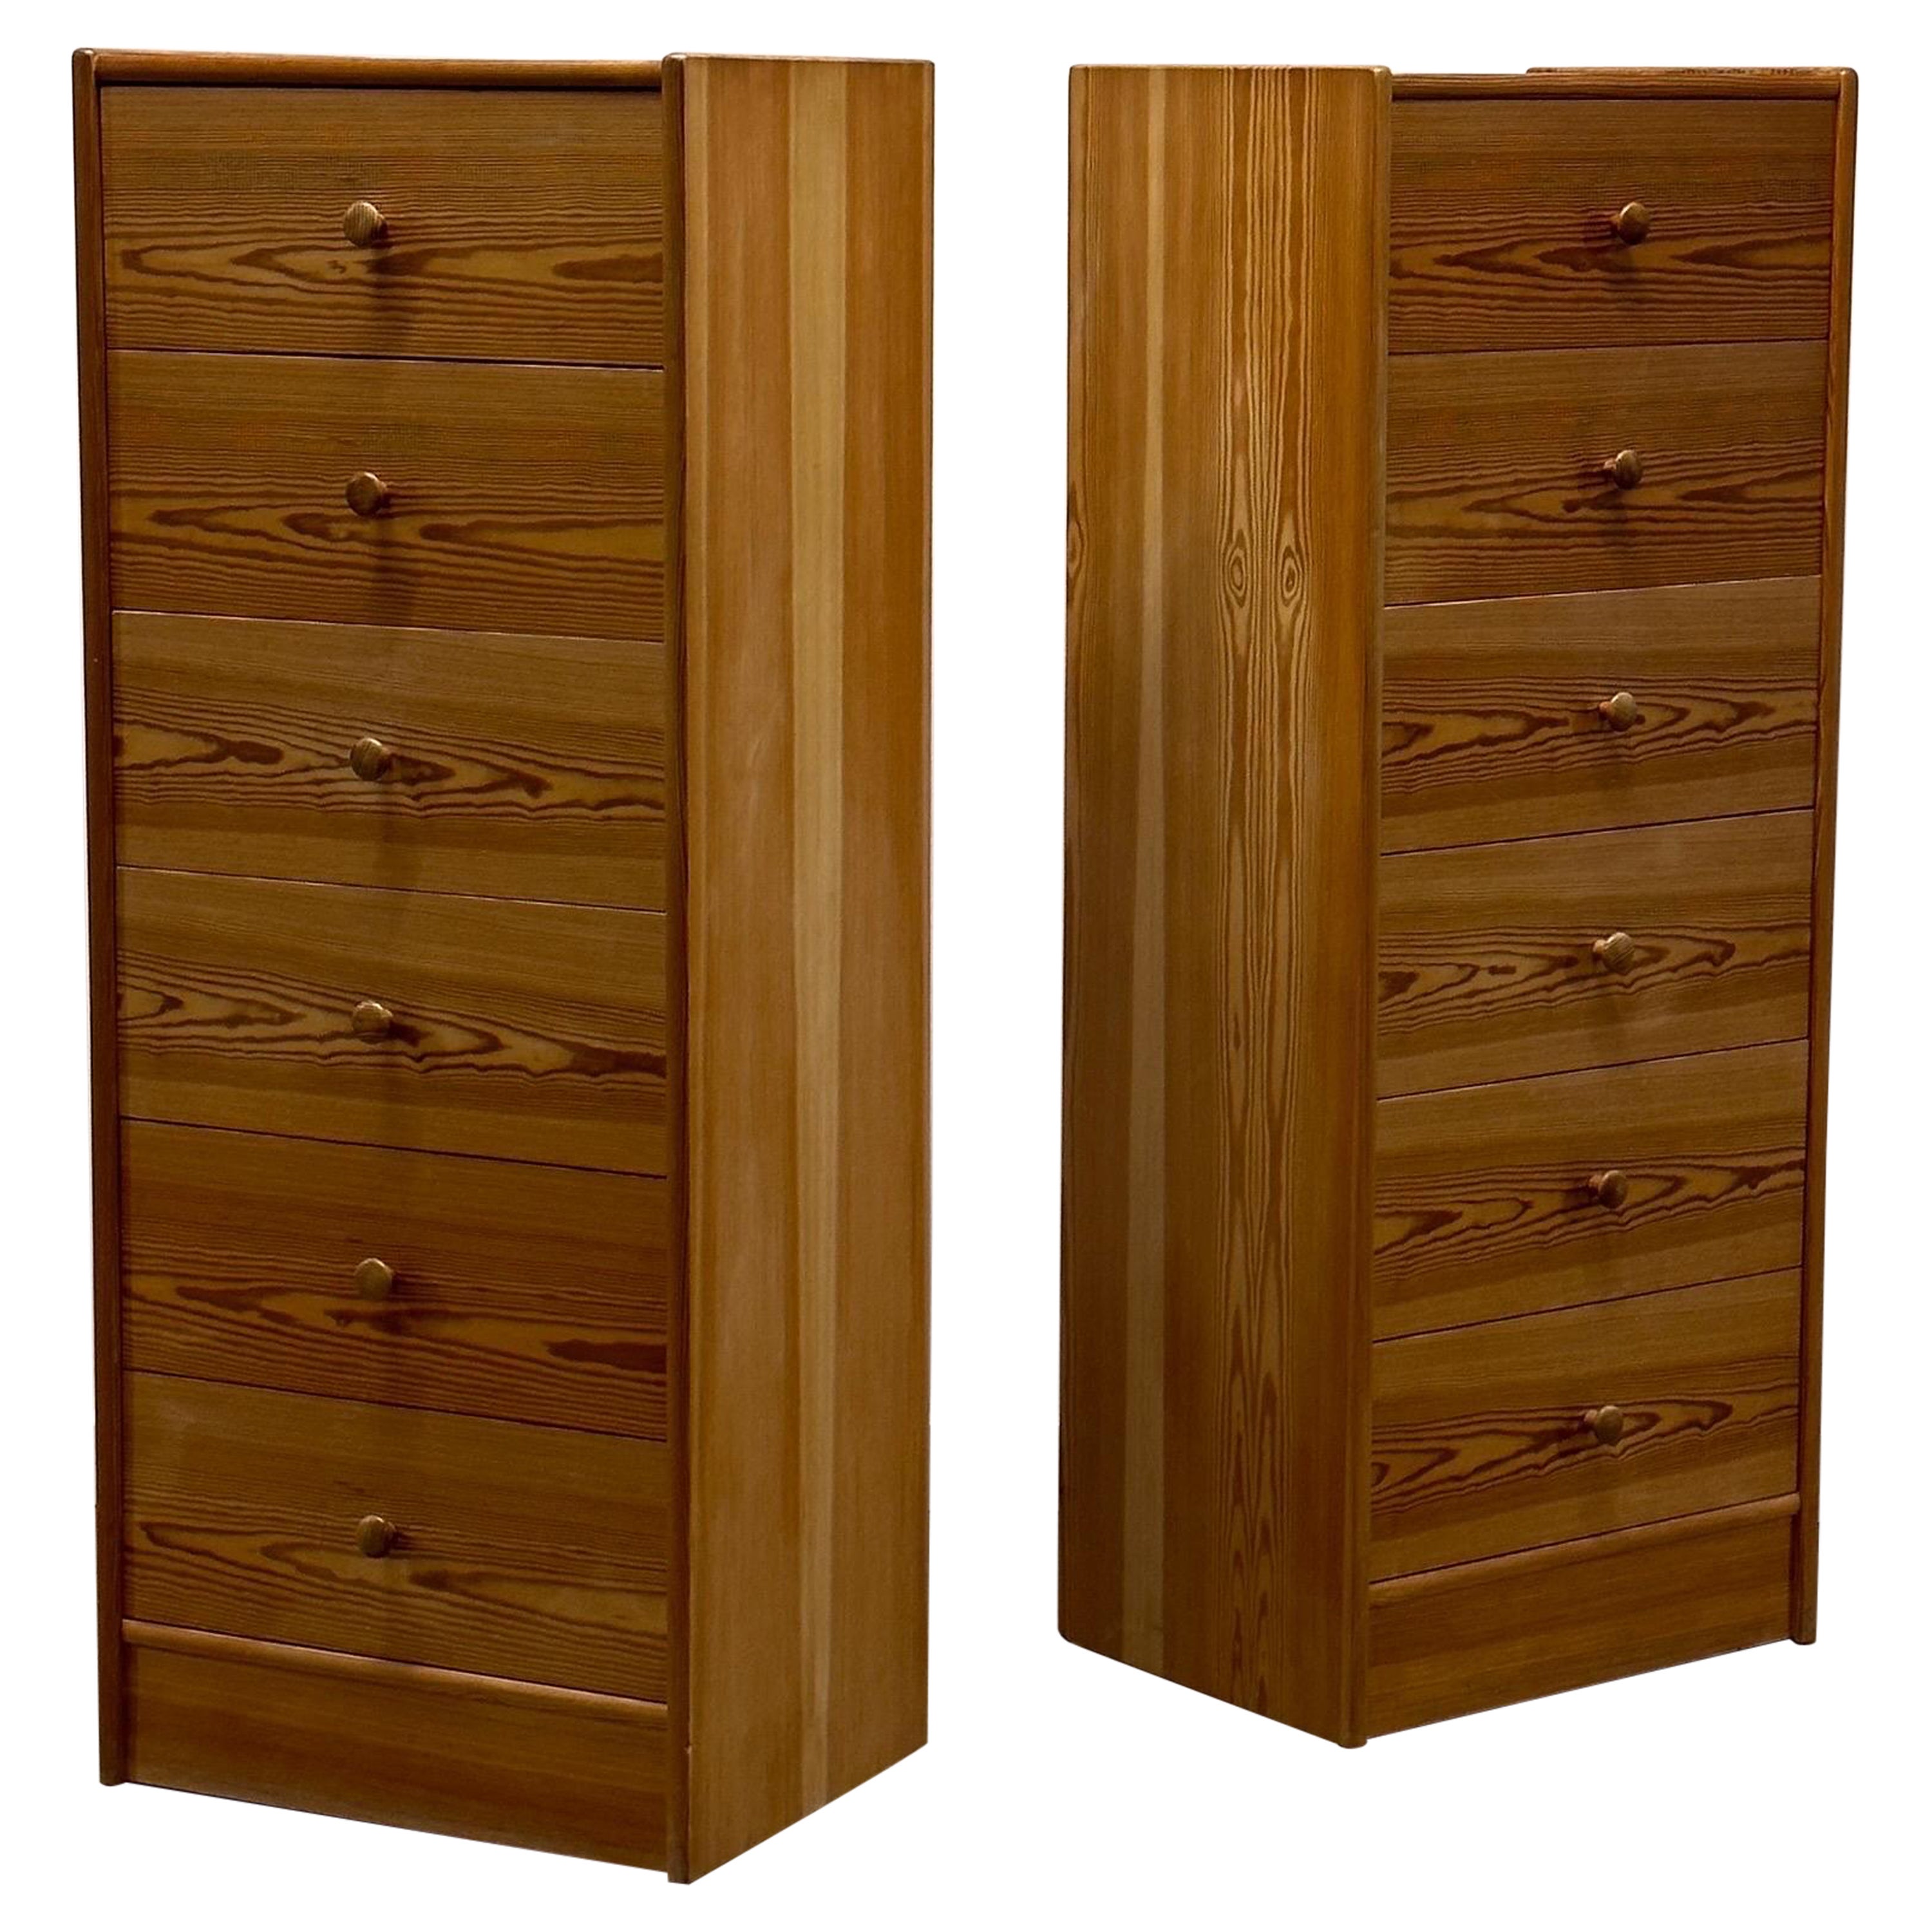 IKEA Commodes and Chests of Drawers